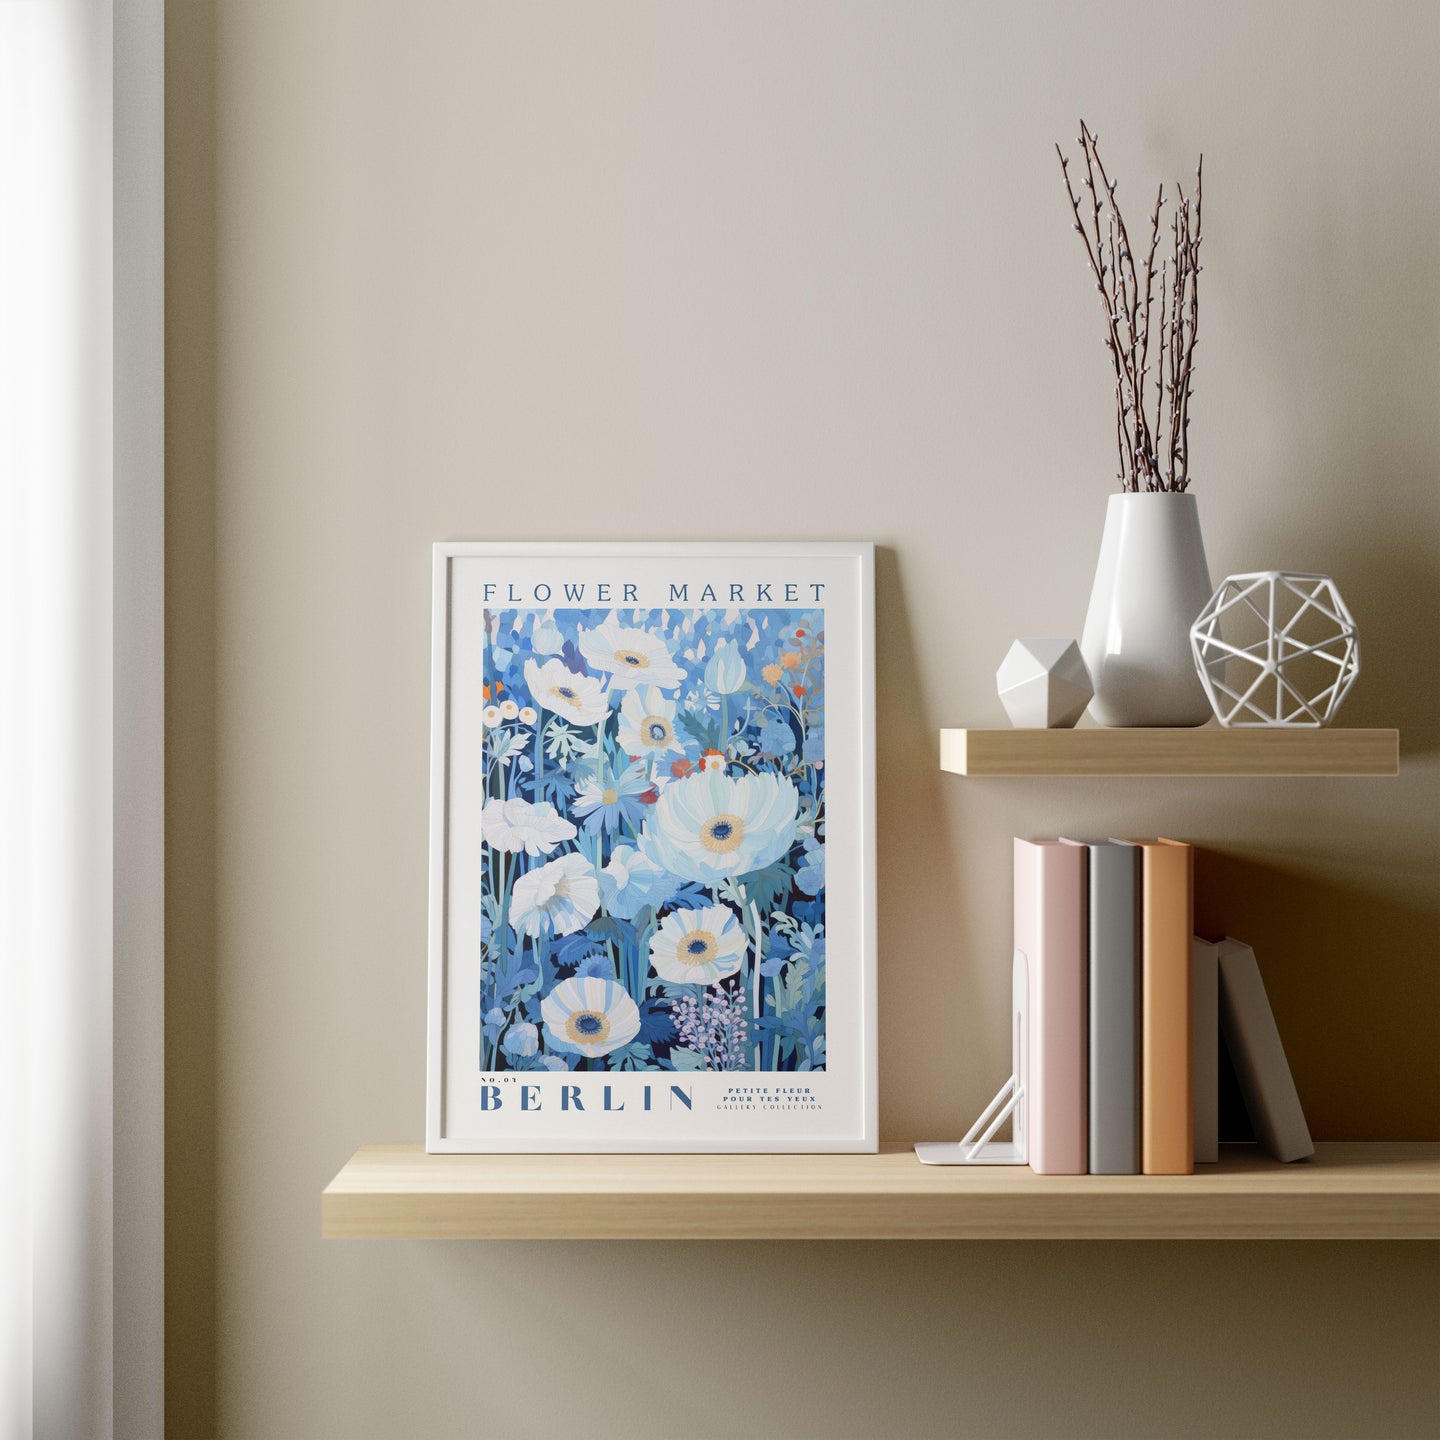 Berlin Flower Market Poster, Berlin Flower Painting Print, Floral Wall Art, Colorful Wall Art Abstract, Nature Abstract Print, Light Blue